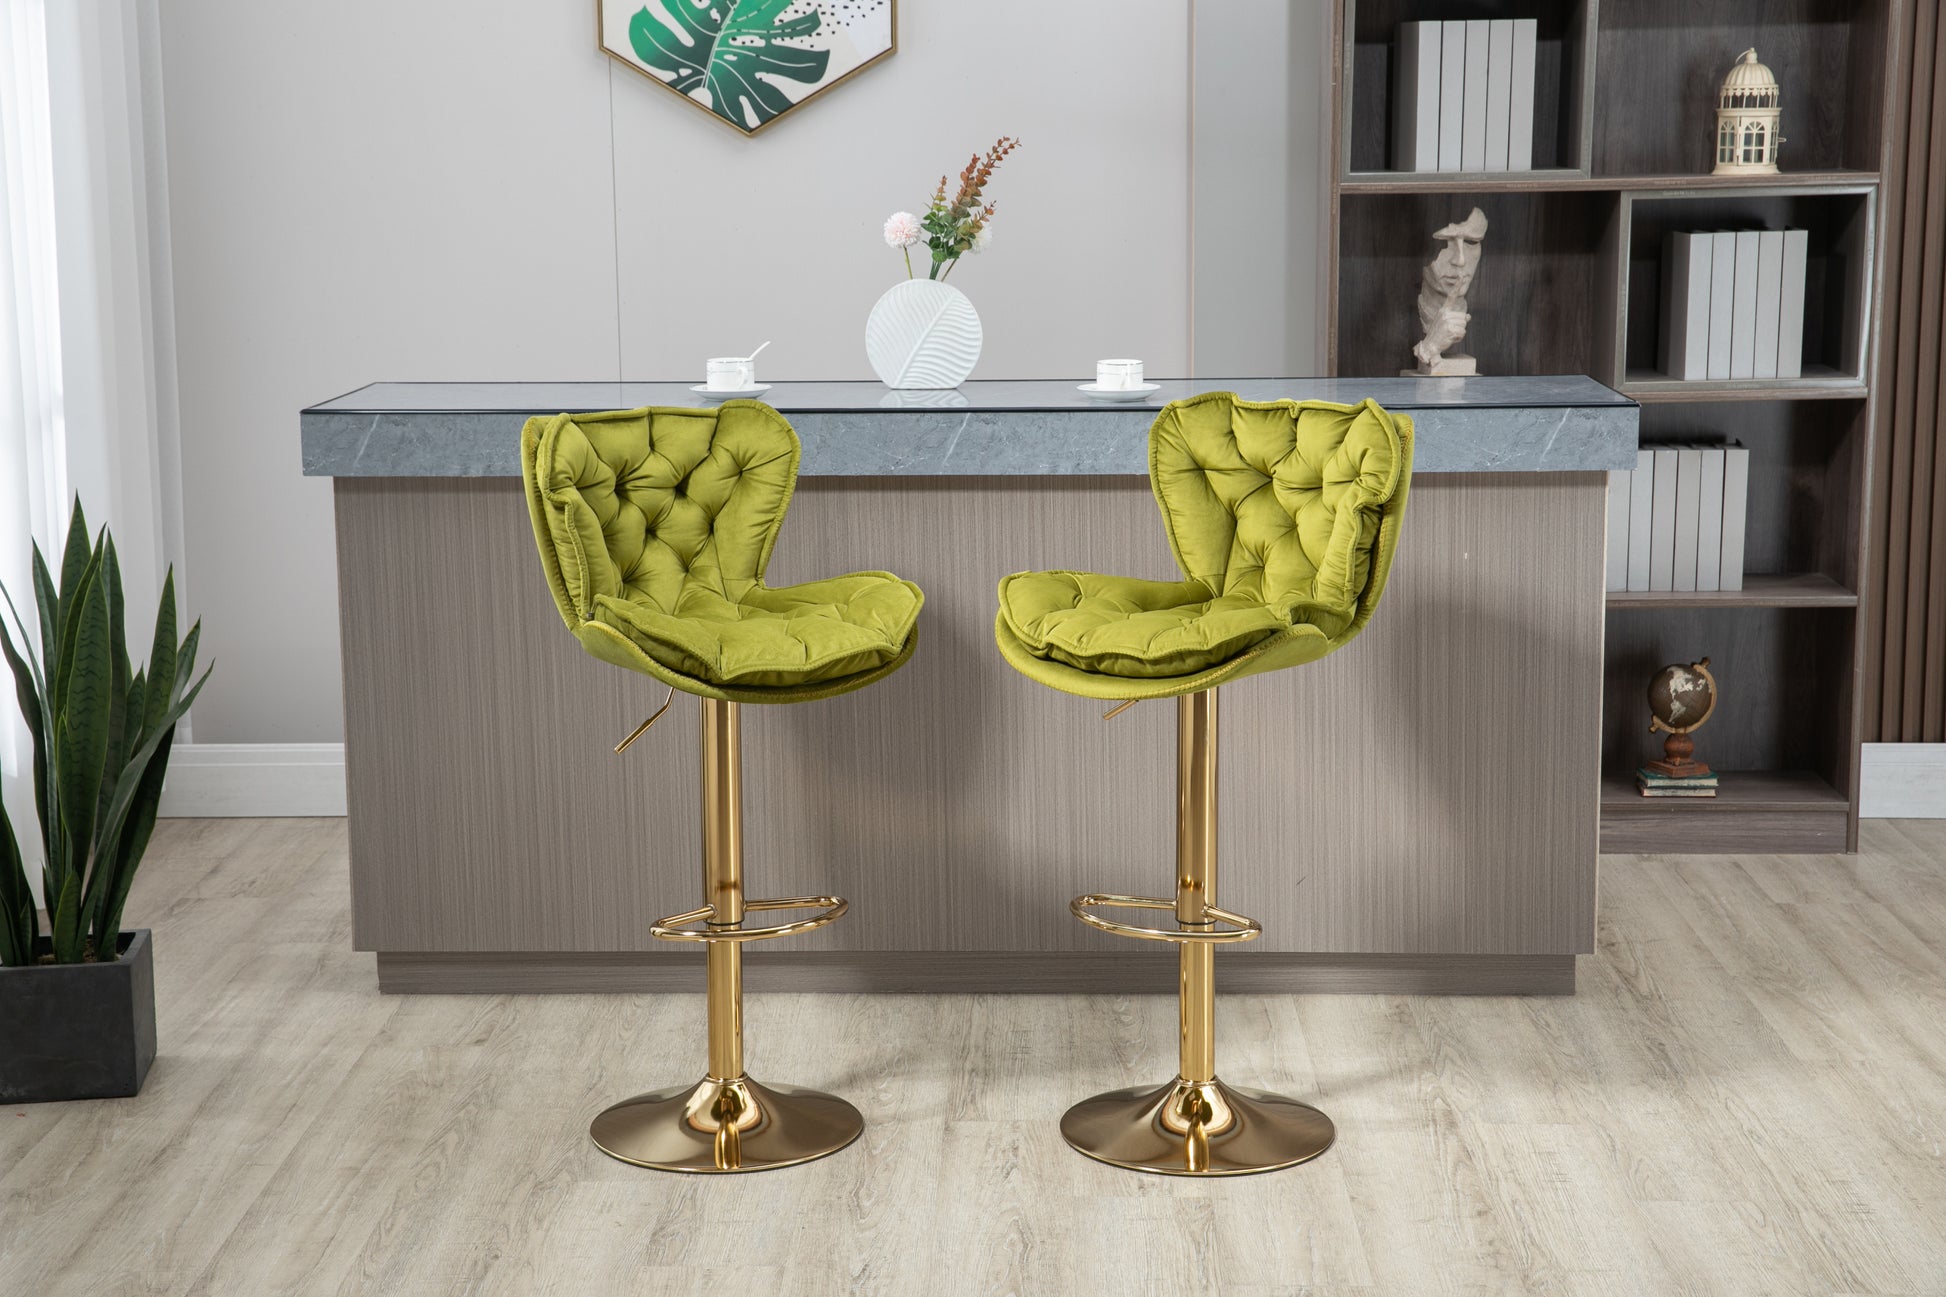 COOLMORE Bar Stools with Back and Footrest Counter Height Chairs 2PC/SET